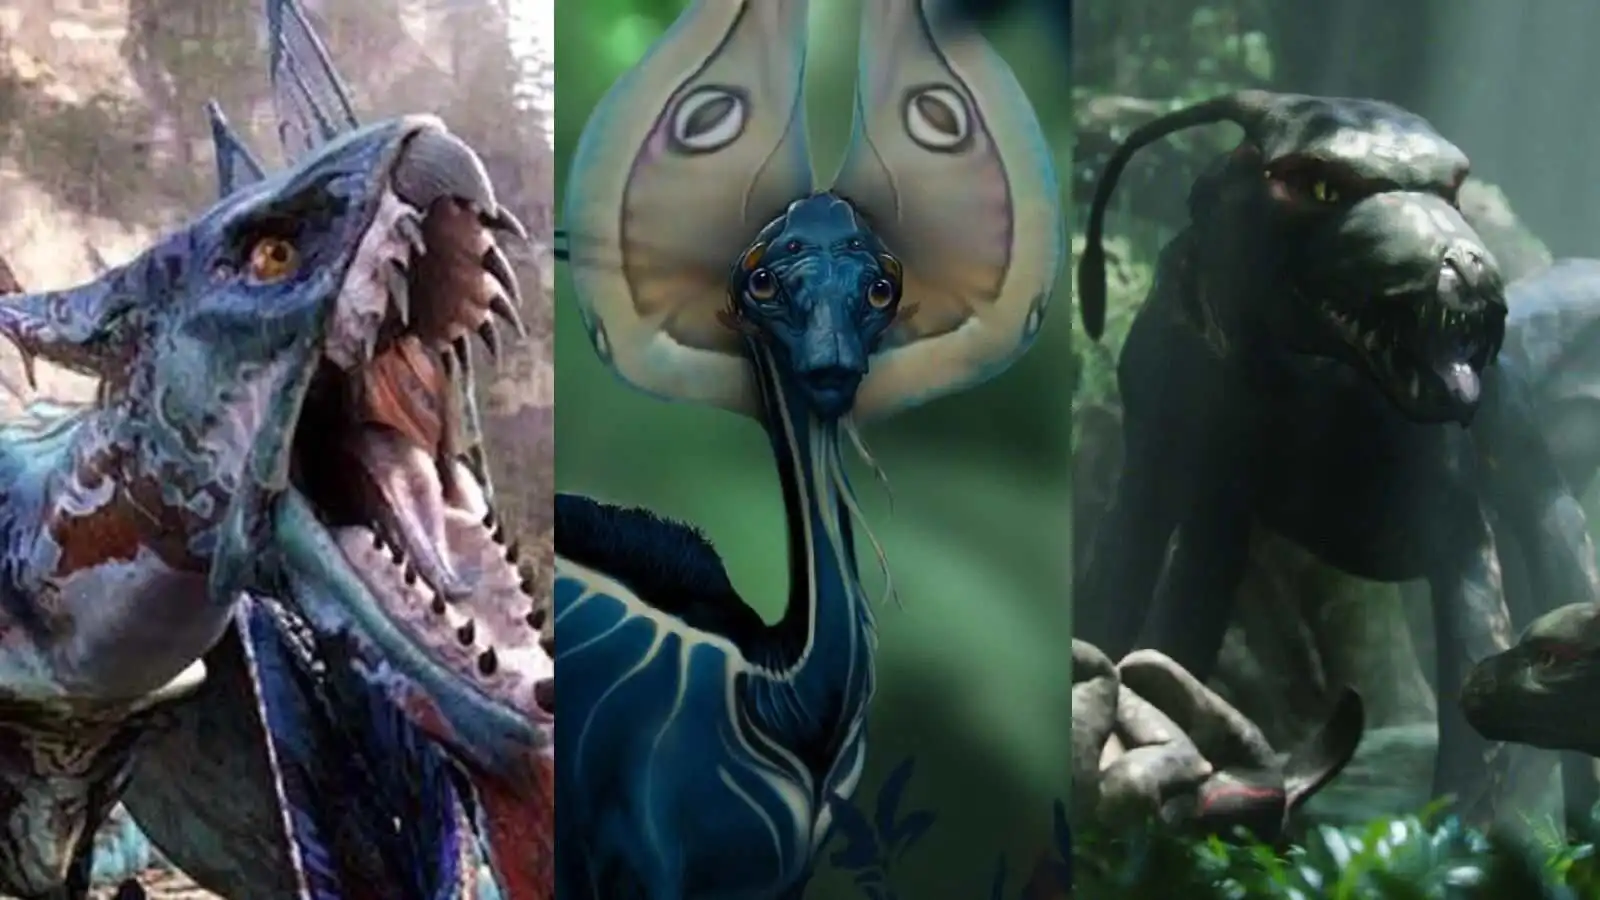 Top 10 Creatures In James Cameron's Avatar Universe - First Curiosity